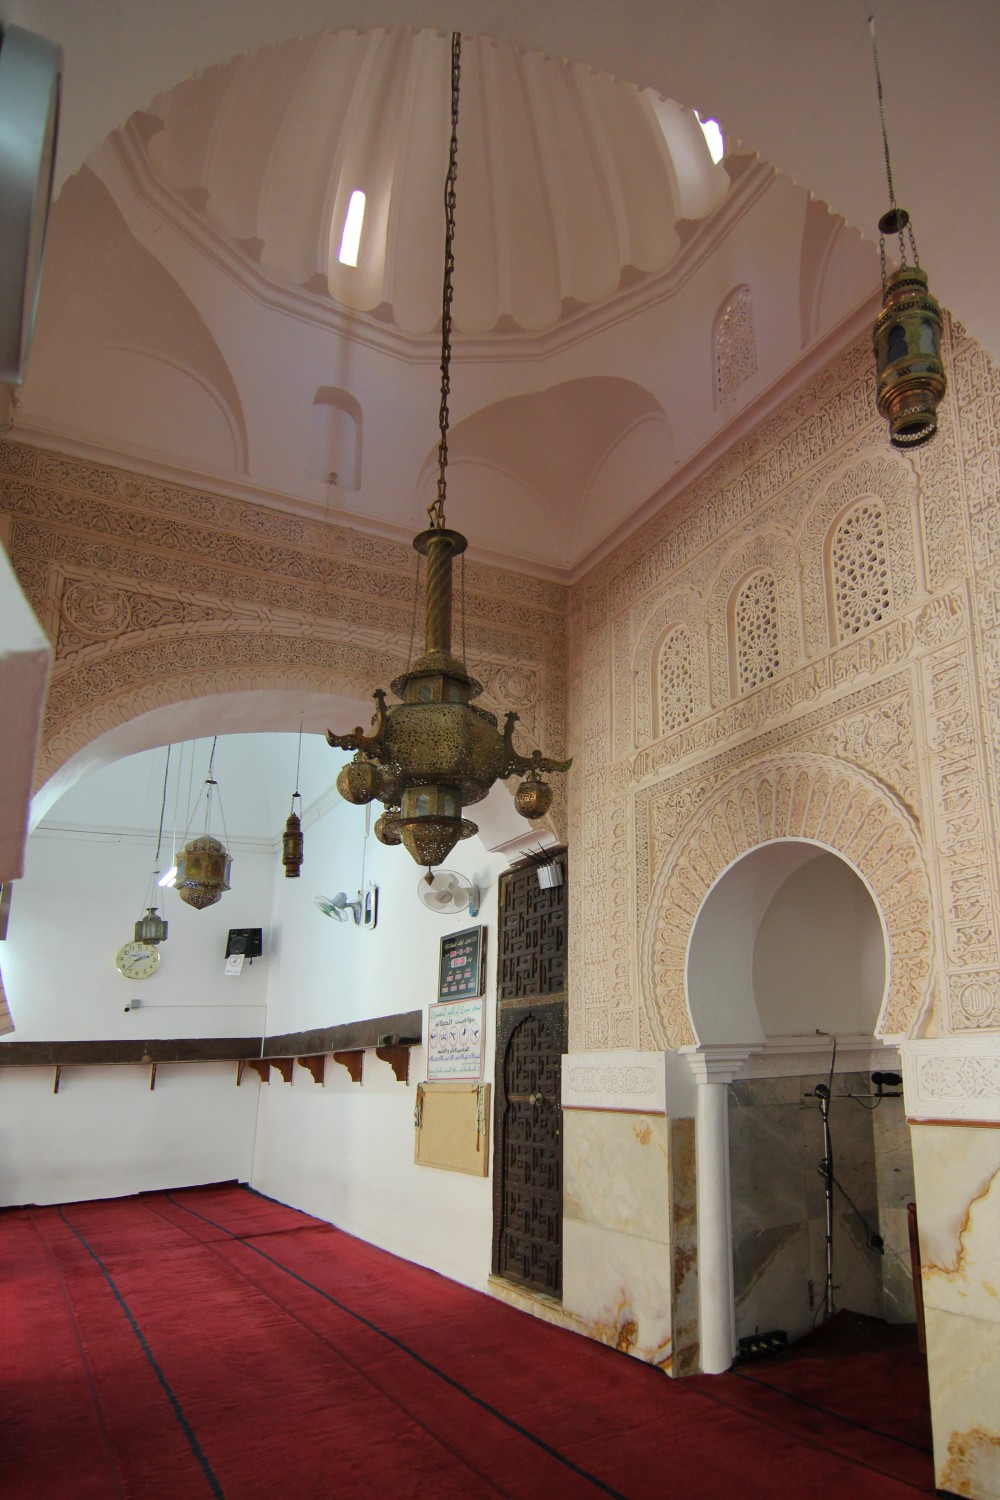 Side view of the mihrab showing dome supported by squinches